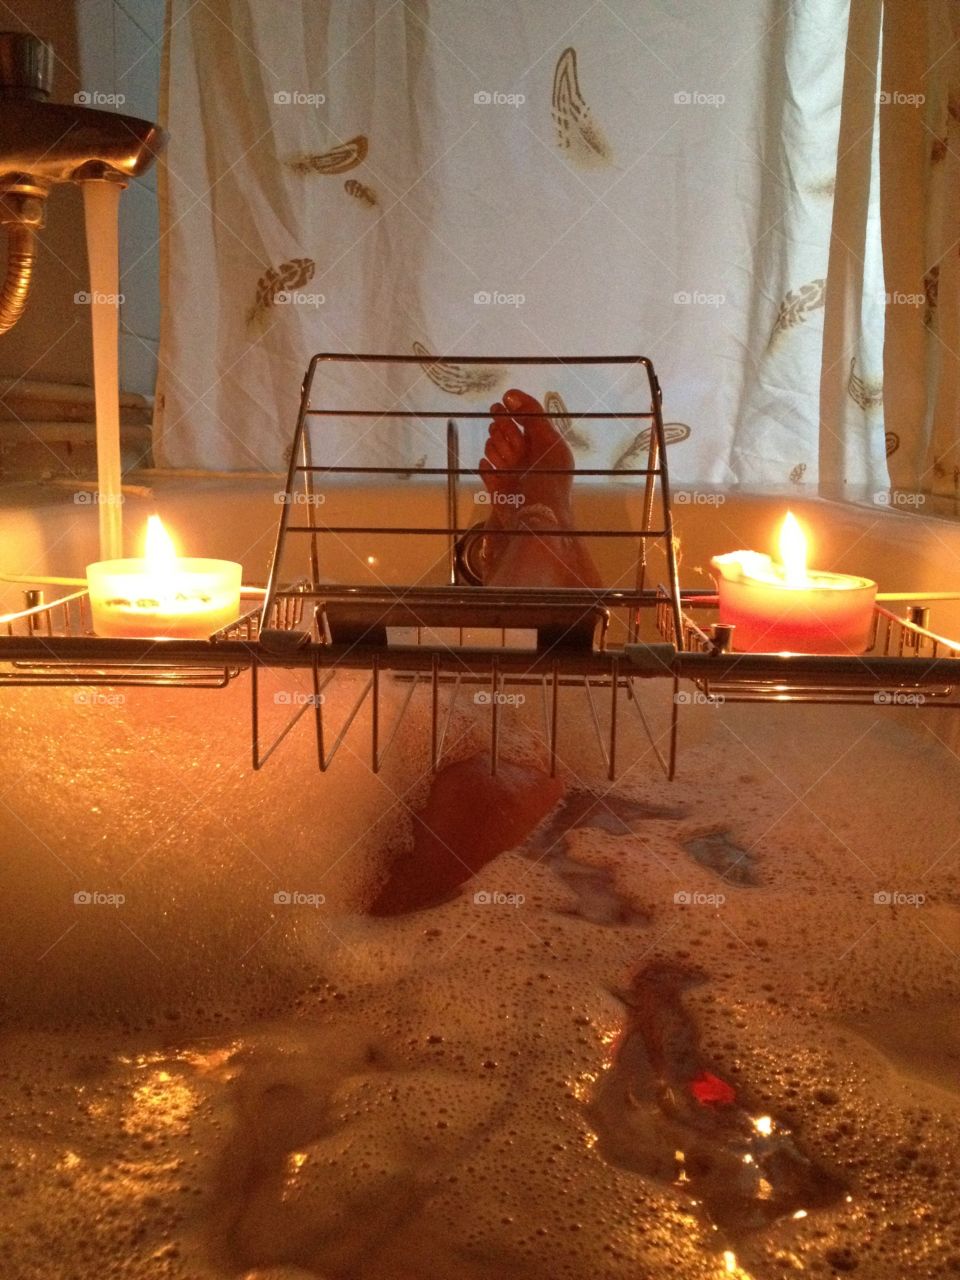 Relaxing in the bathtub with bubbles and candles